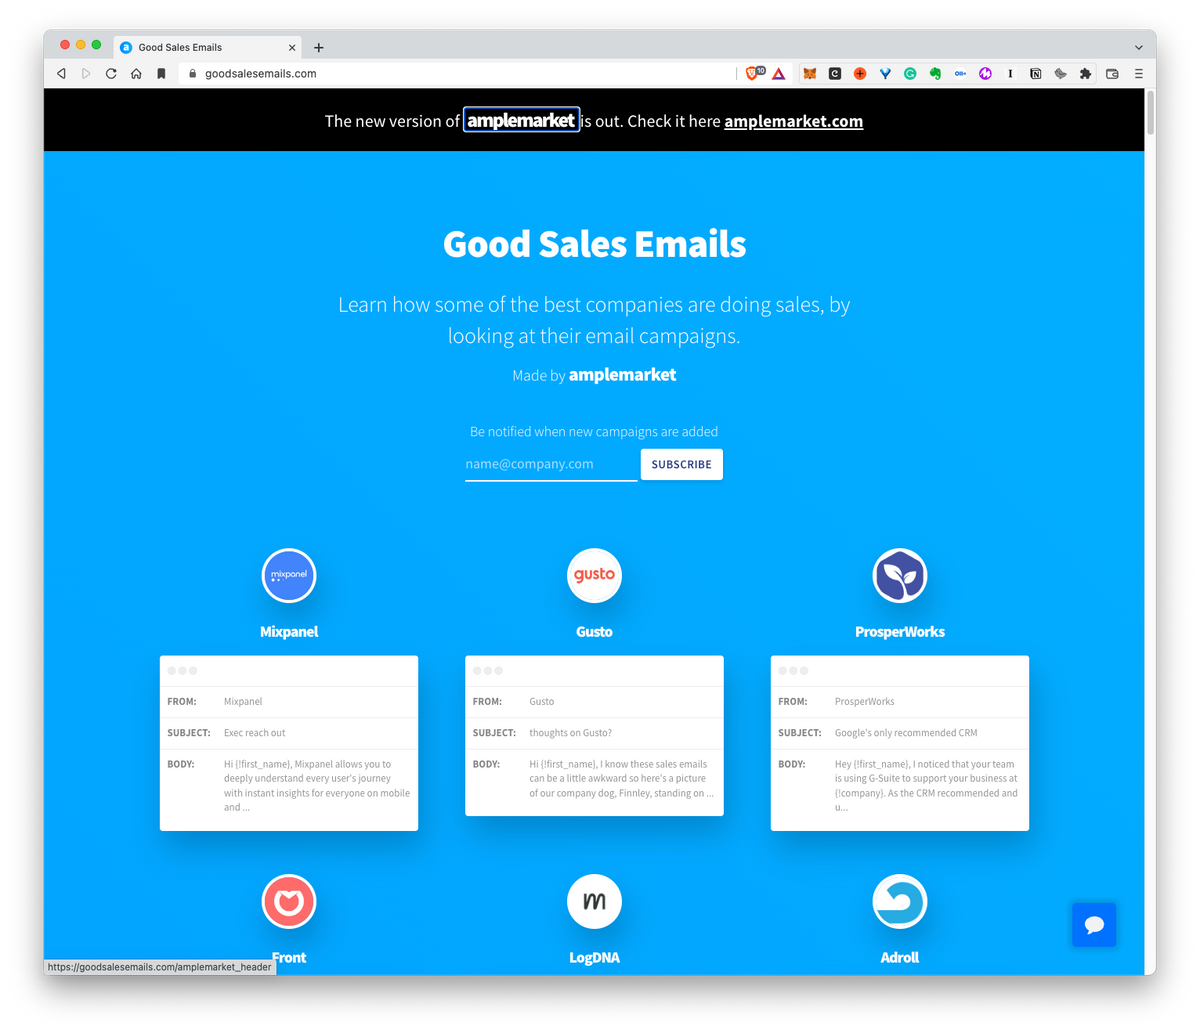 Good Sales Emails: Learn how some of the best companies are doing sales, by looking at their email campaigns.